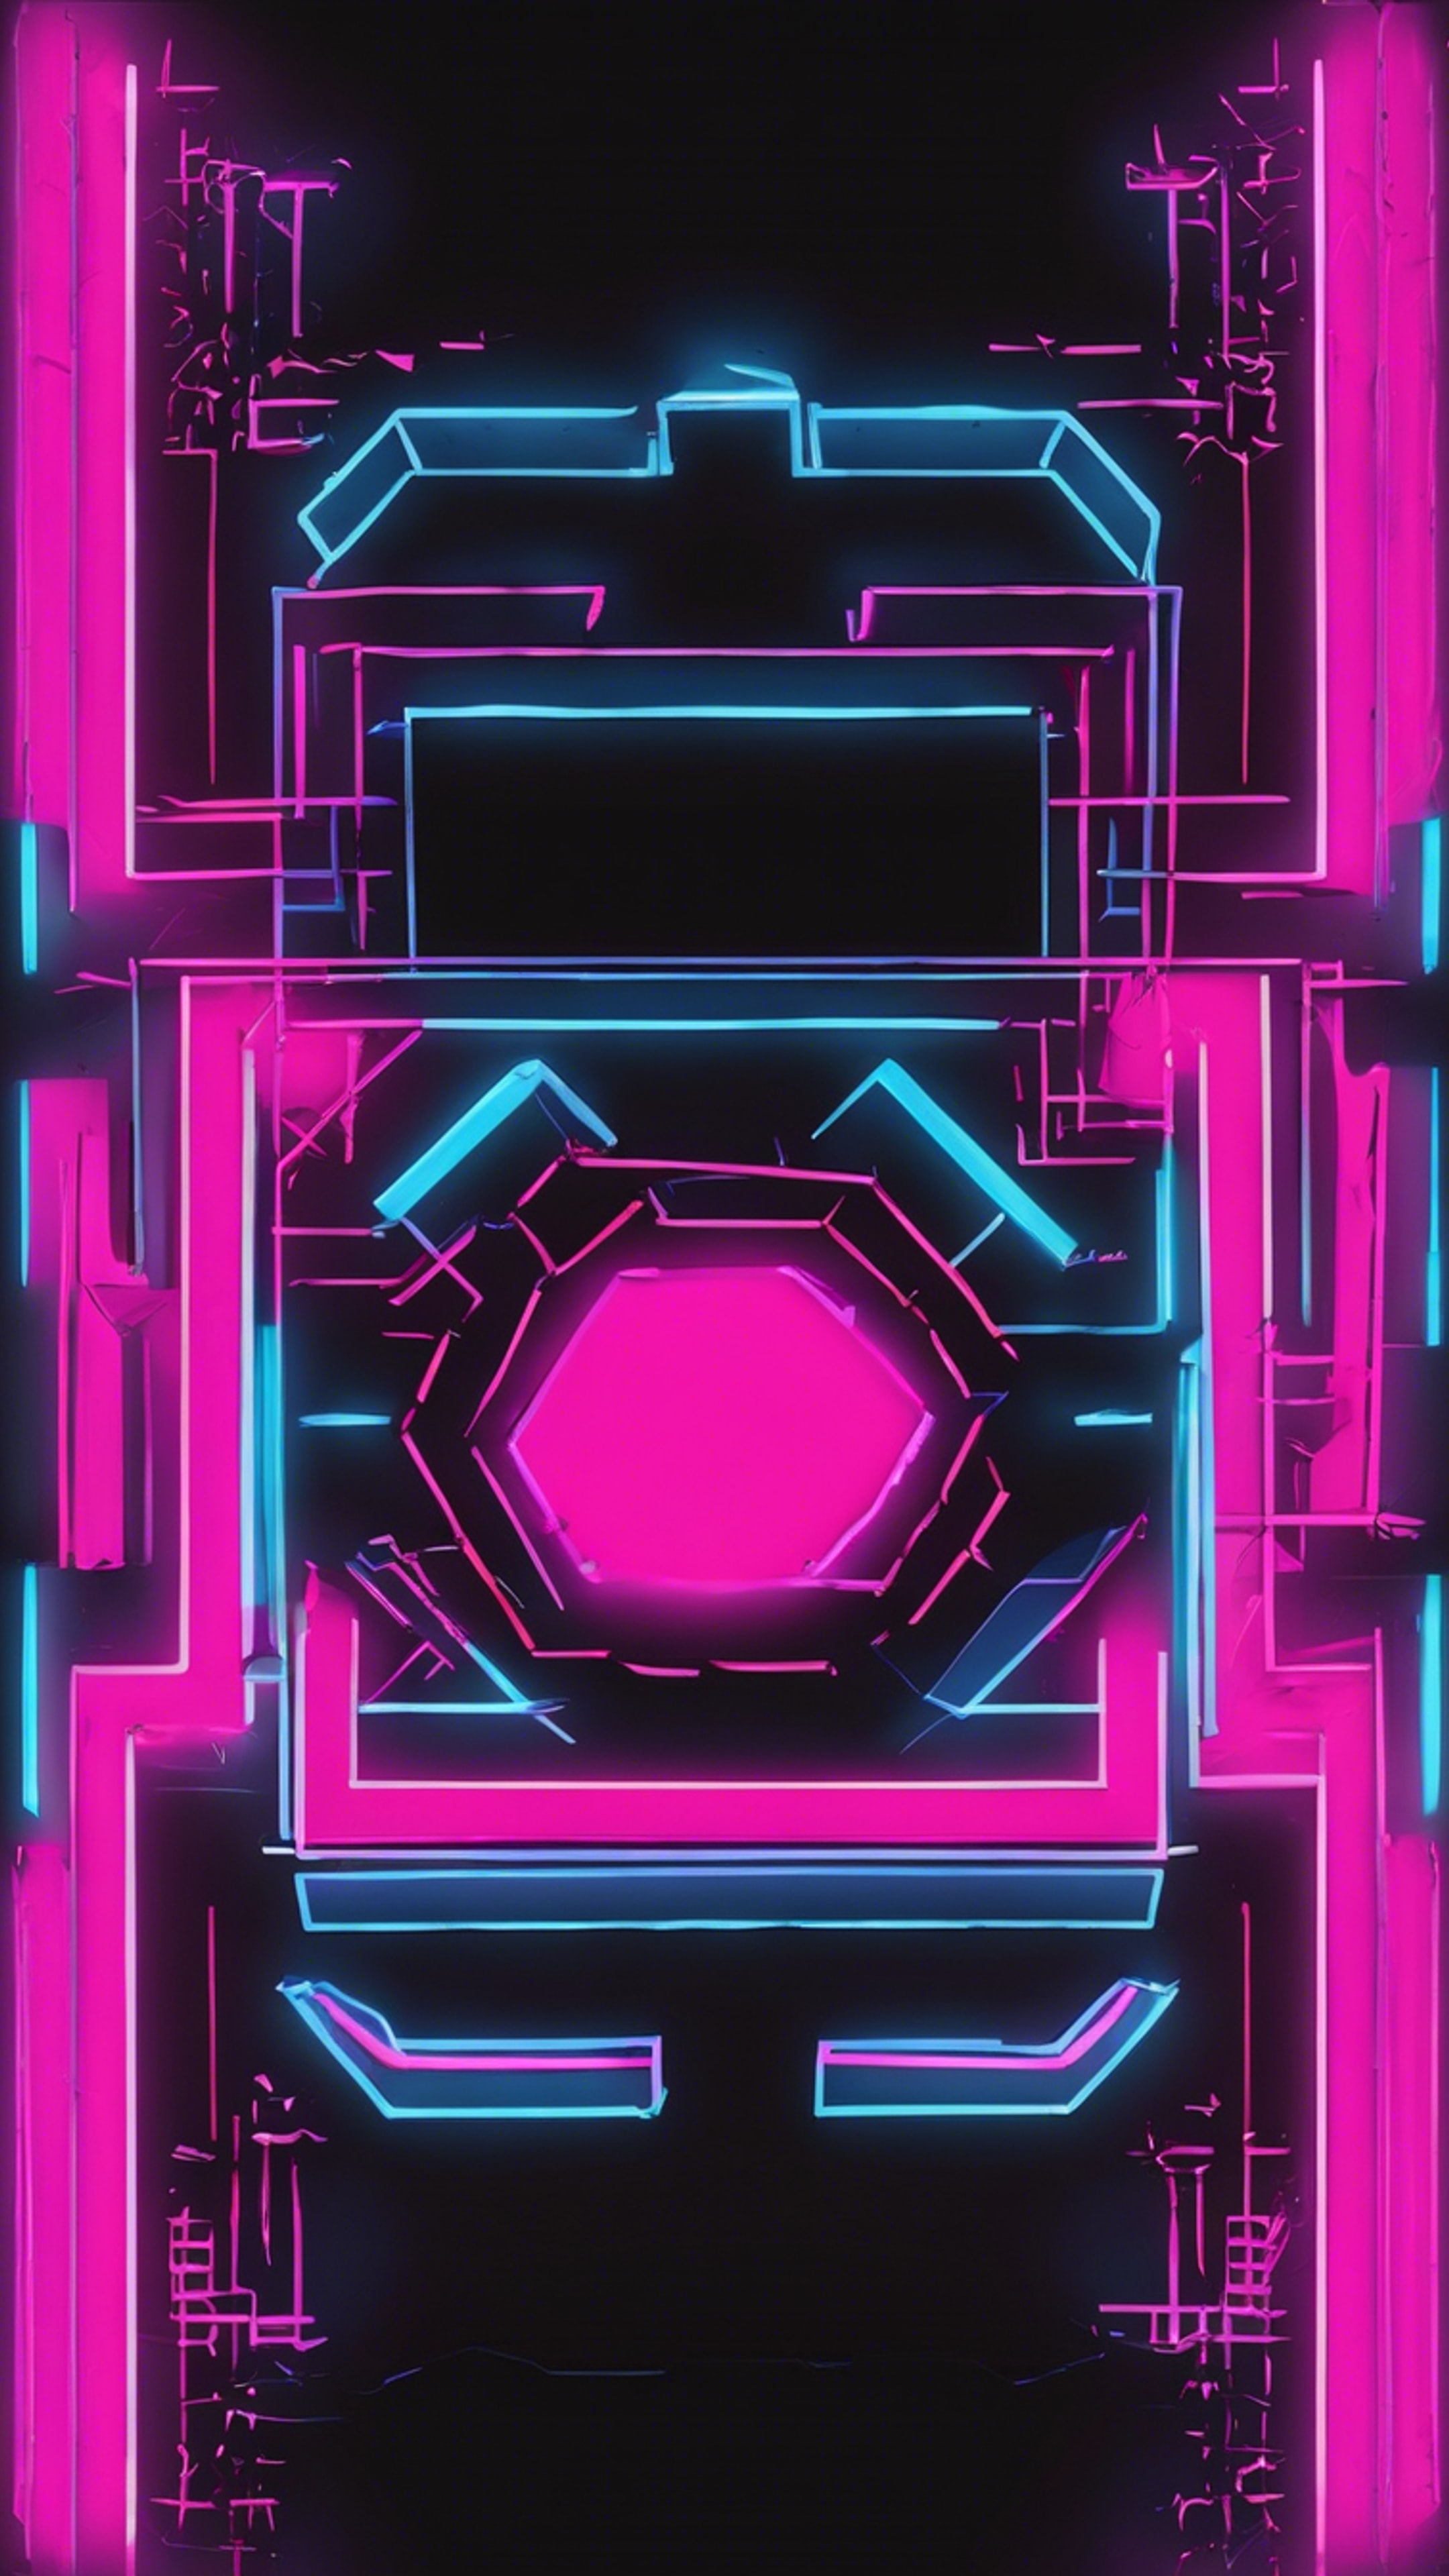 Bright neon pink and blue geometric shapes against a black background, reminiscent of 80s arcade games. Tapéta[dd42a0f55e3e425295c8]